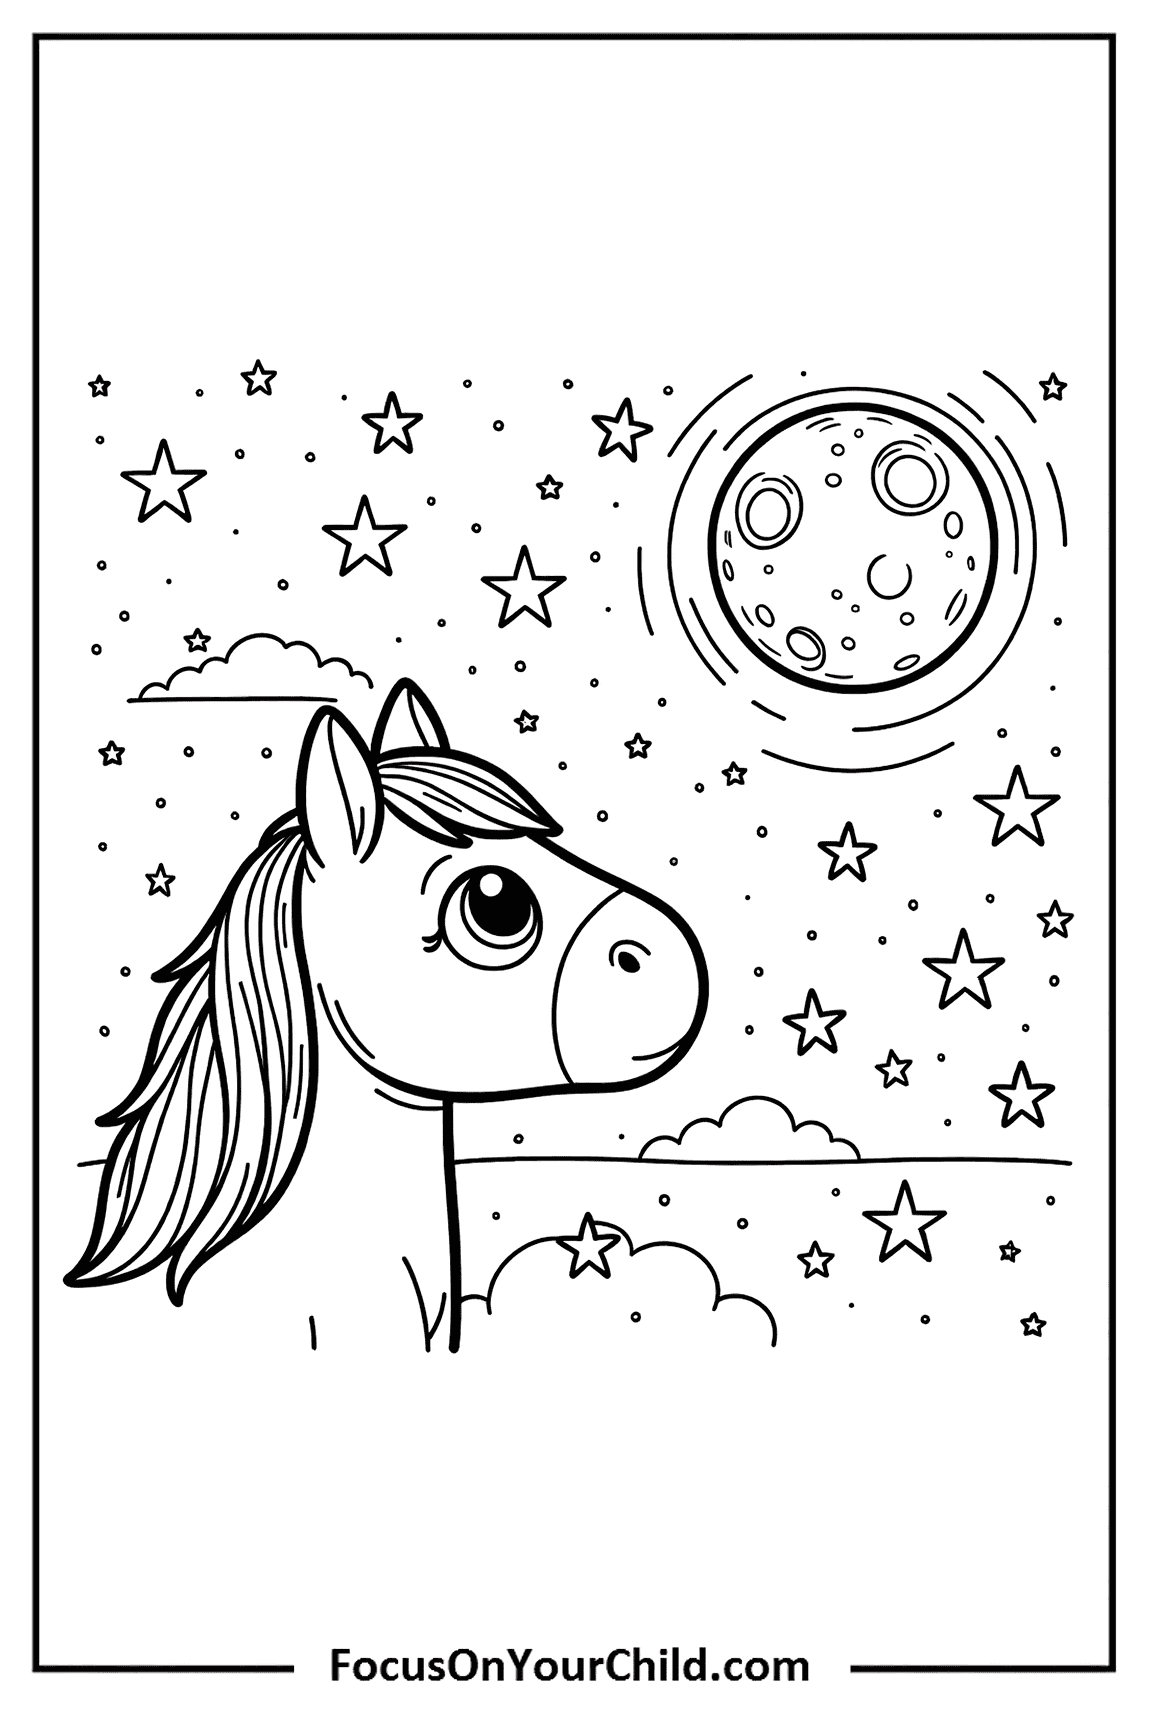 Whimsical horse under starry night sky for coloring on FocusOnYourChild.com.